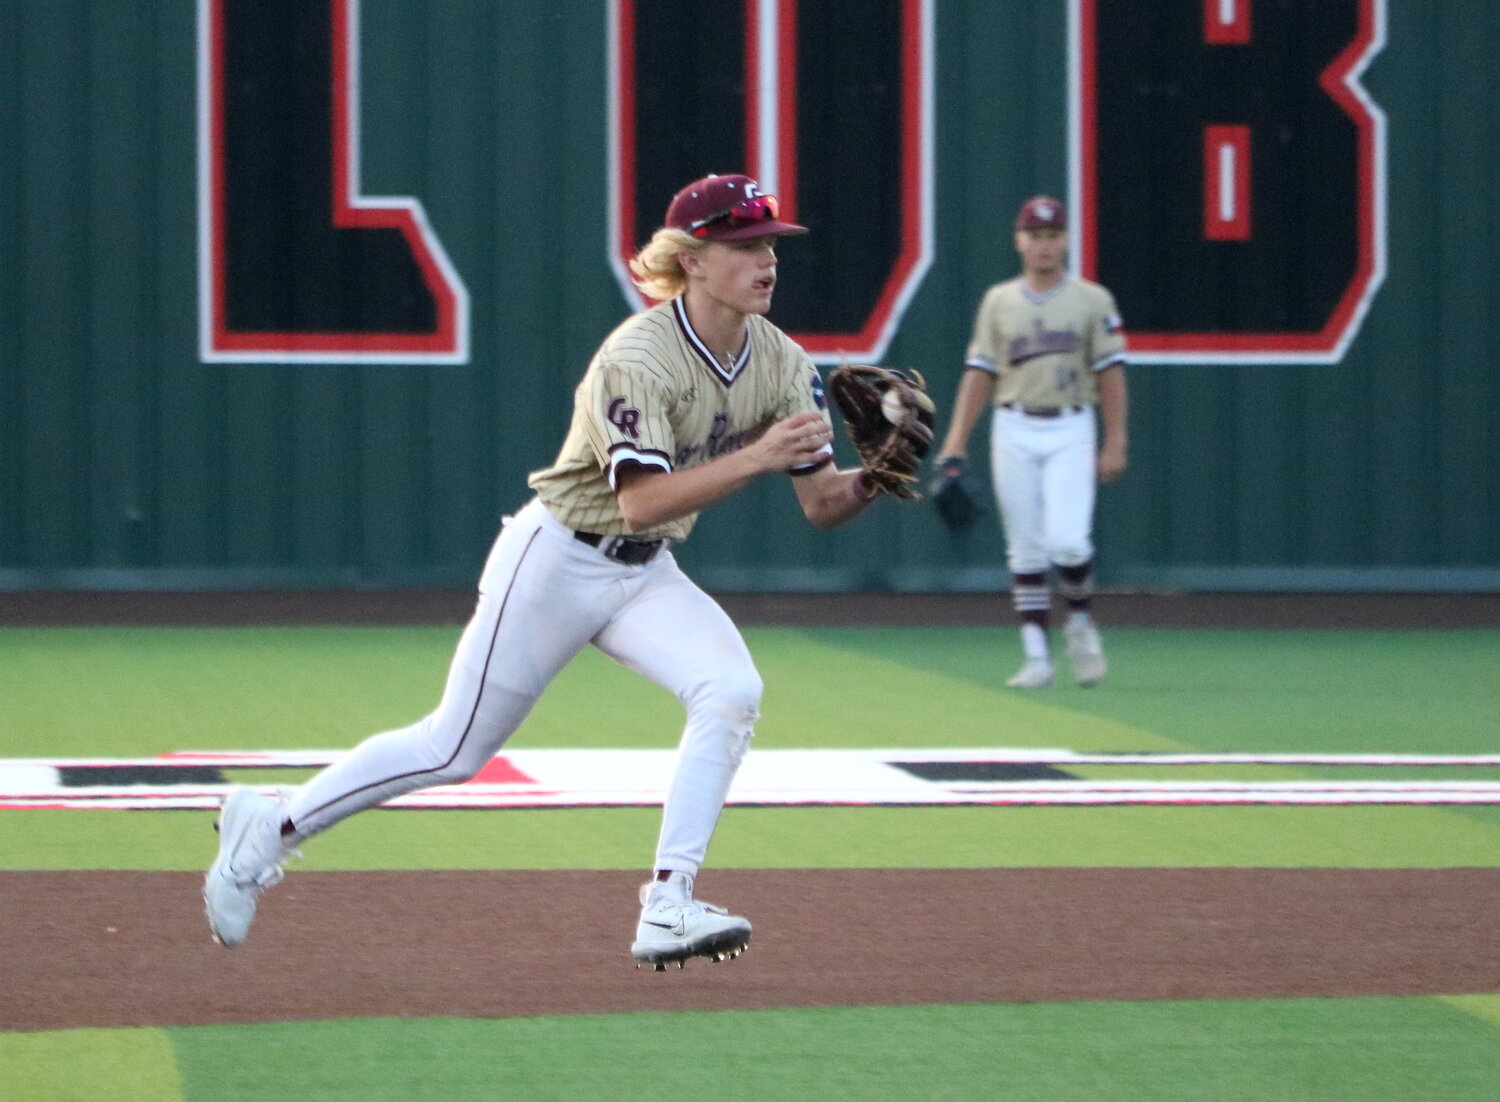 Brock DeYoung throws to first base during Friday's Regional Quarterfinal between Cinco Ranch and Ridge Point at Langham Creek.